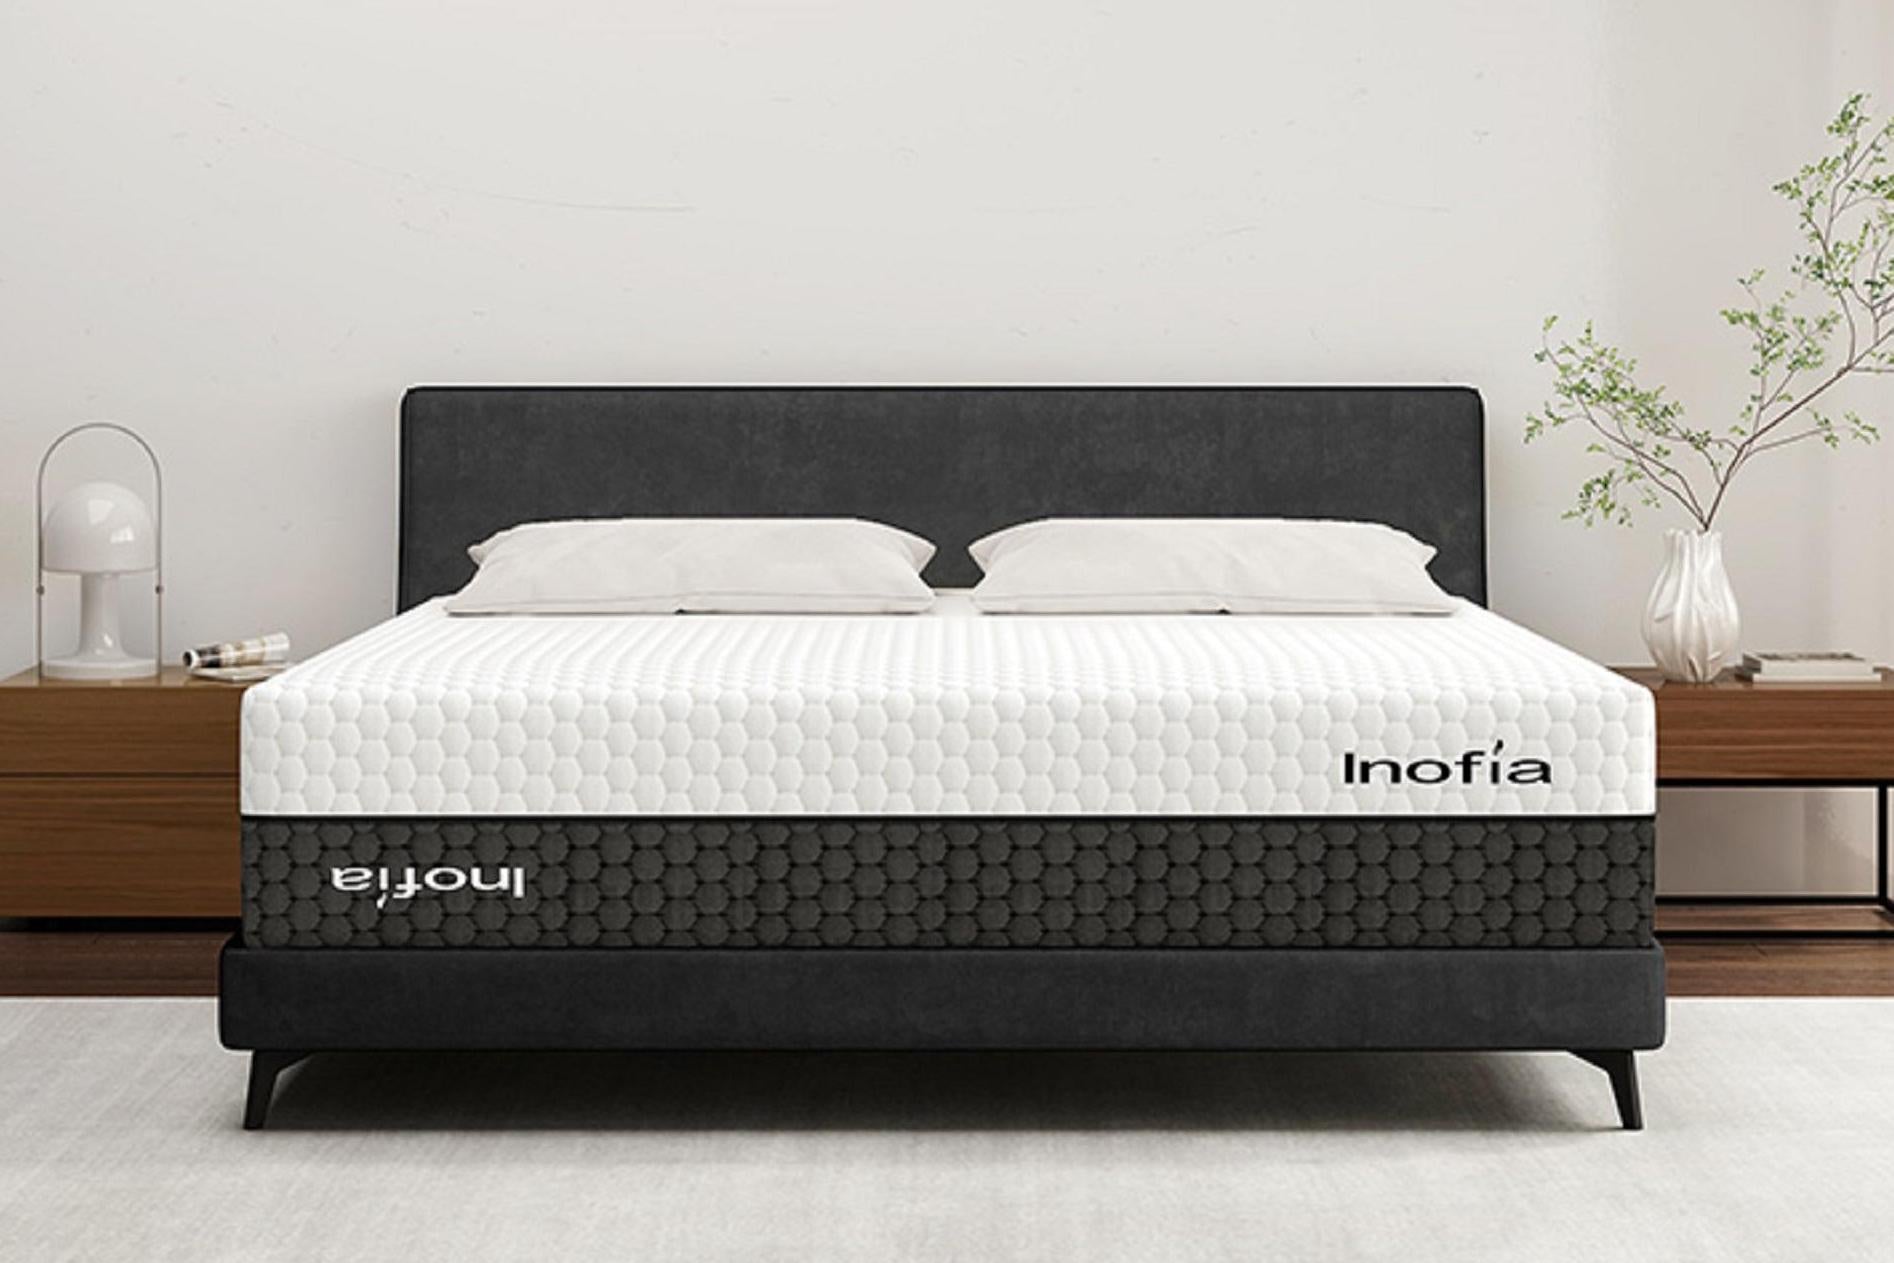 Mattress Sizes & Dimensions Guide